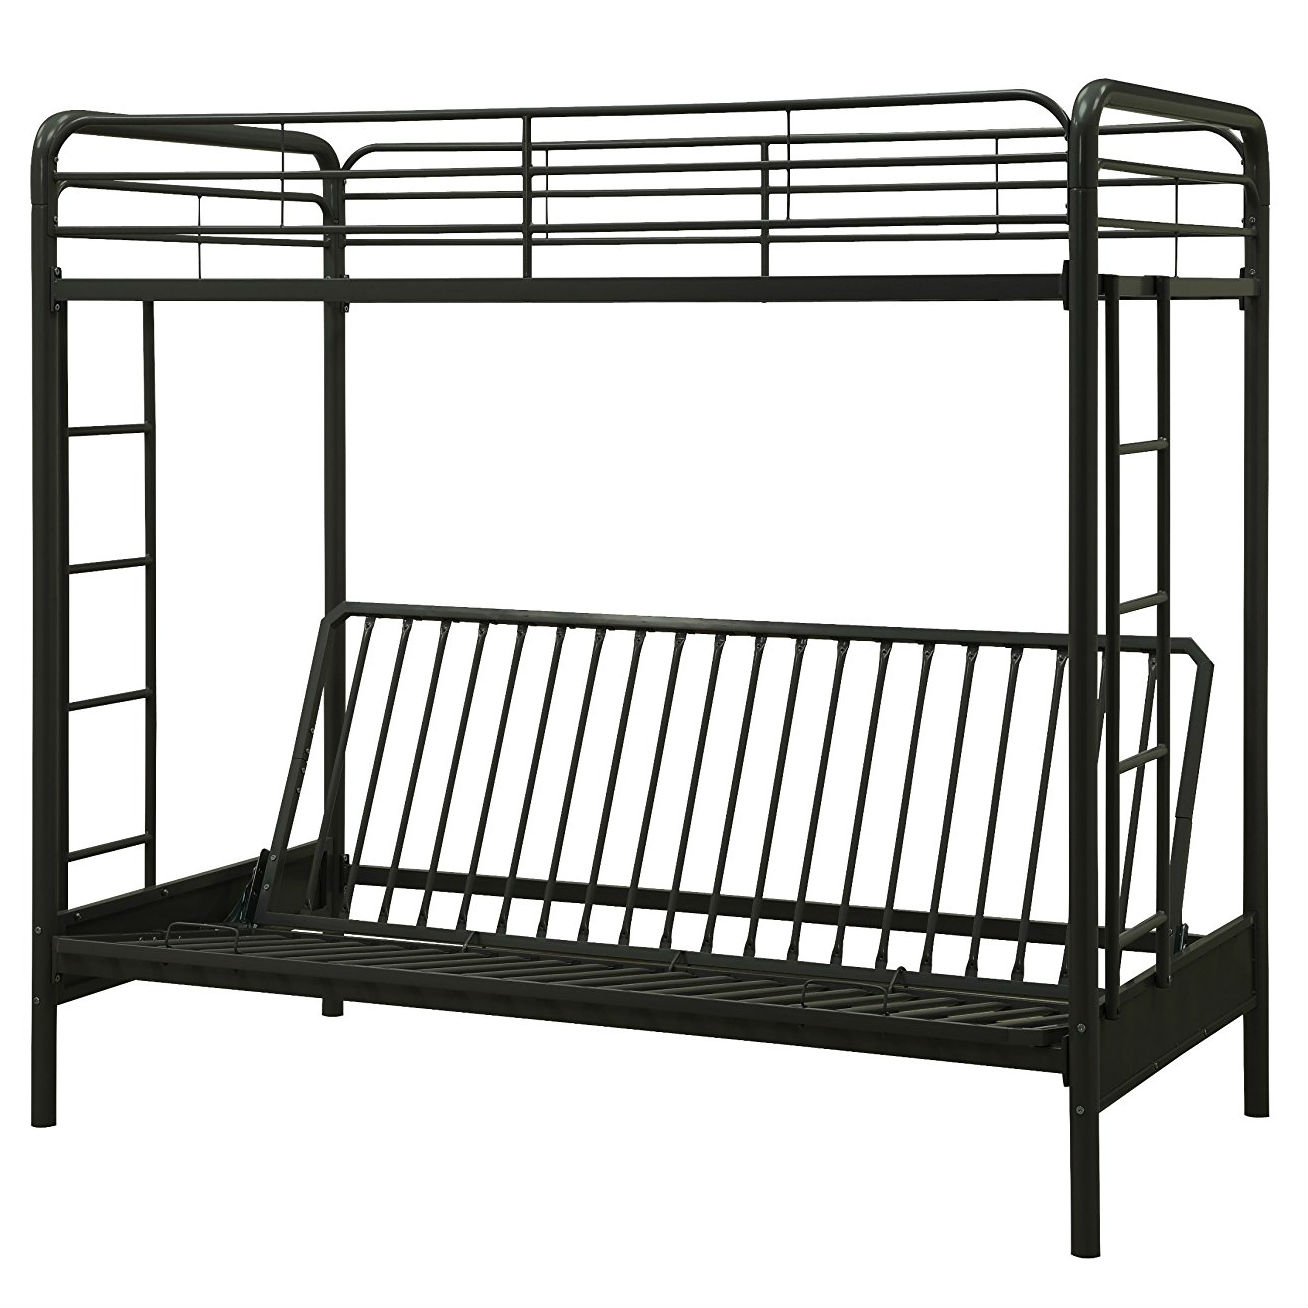 Futon Metal Bunk Bed Frame, Twin Over Full Bunk Bed With Futon